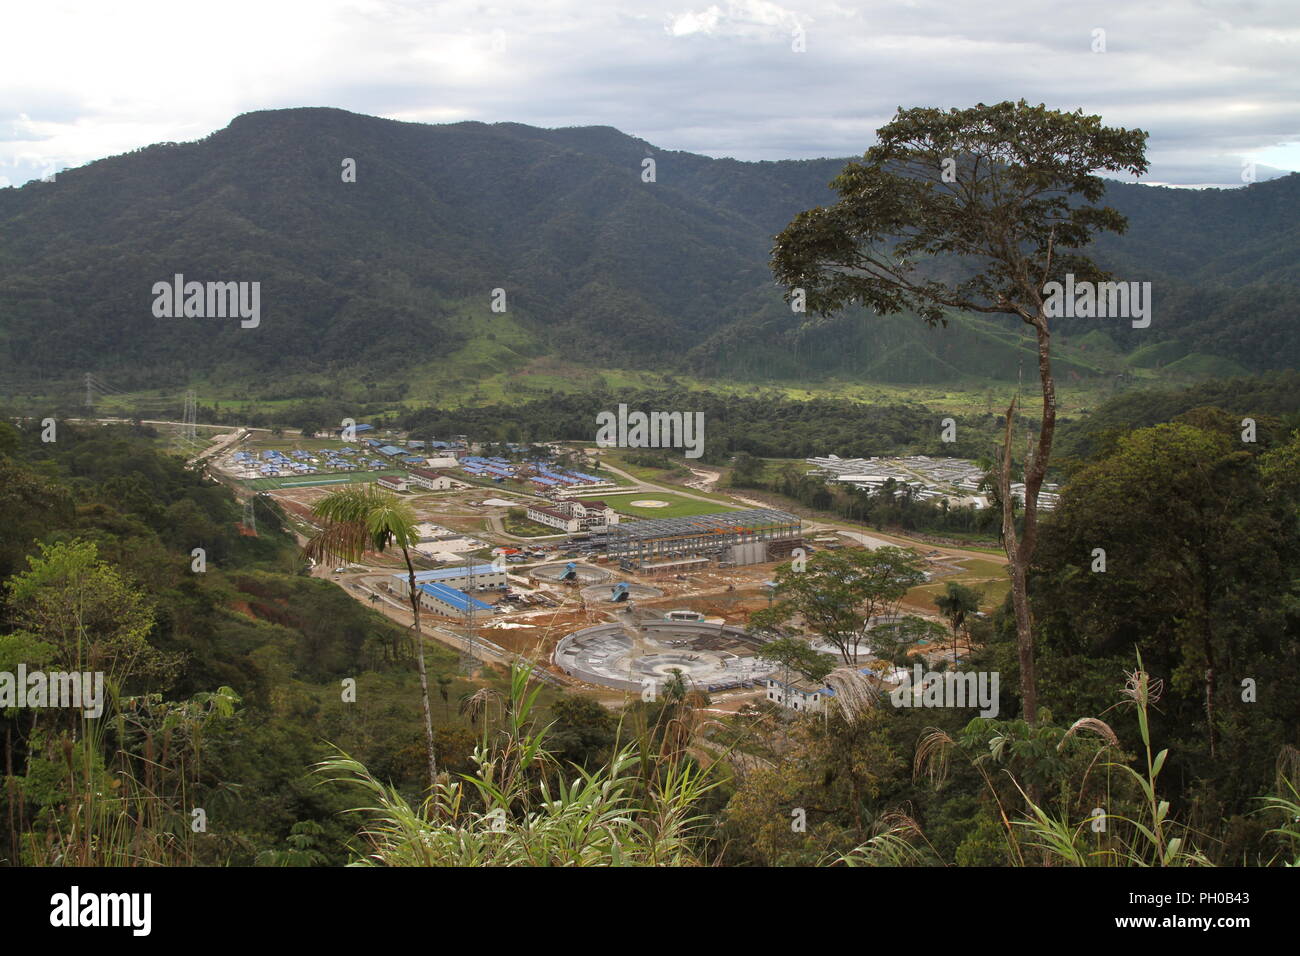 Quito. 21st Aug, 2018. Photo taken on Aug. 21, 2018 shows the factory buildings of Chinese copper mine project Mirador in Zamora-Chinchipe province, Ecuador. Mirador, developed by Chinese company EcuaCorriente, marked Ecuador's entry into large-scale mining, and has breathed new life into the local economy and employment. Credit: Hao Yunfu/Xinhua/Alamy Live News Stock Photo